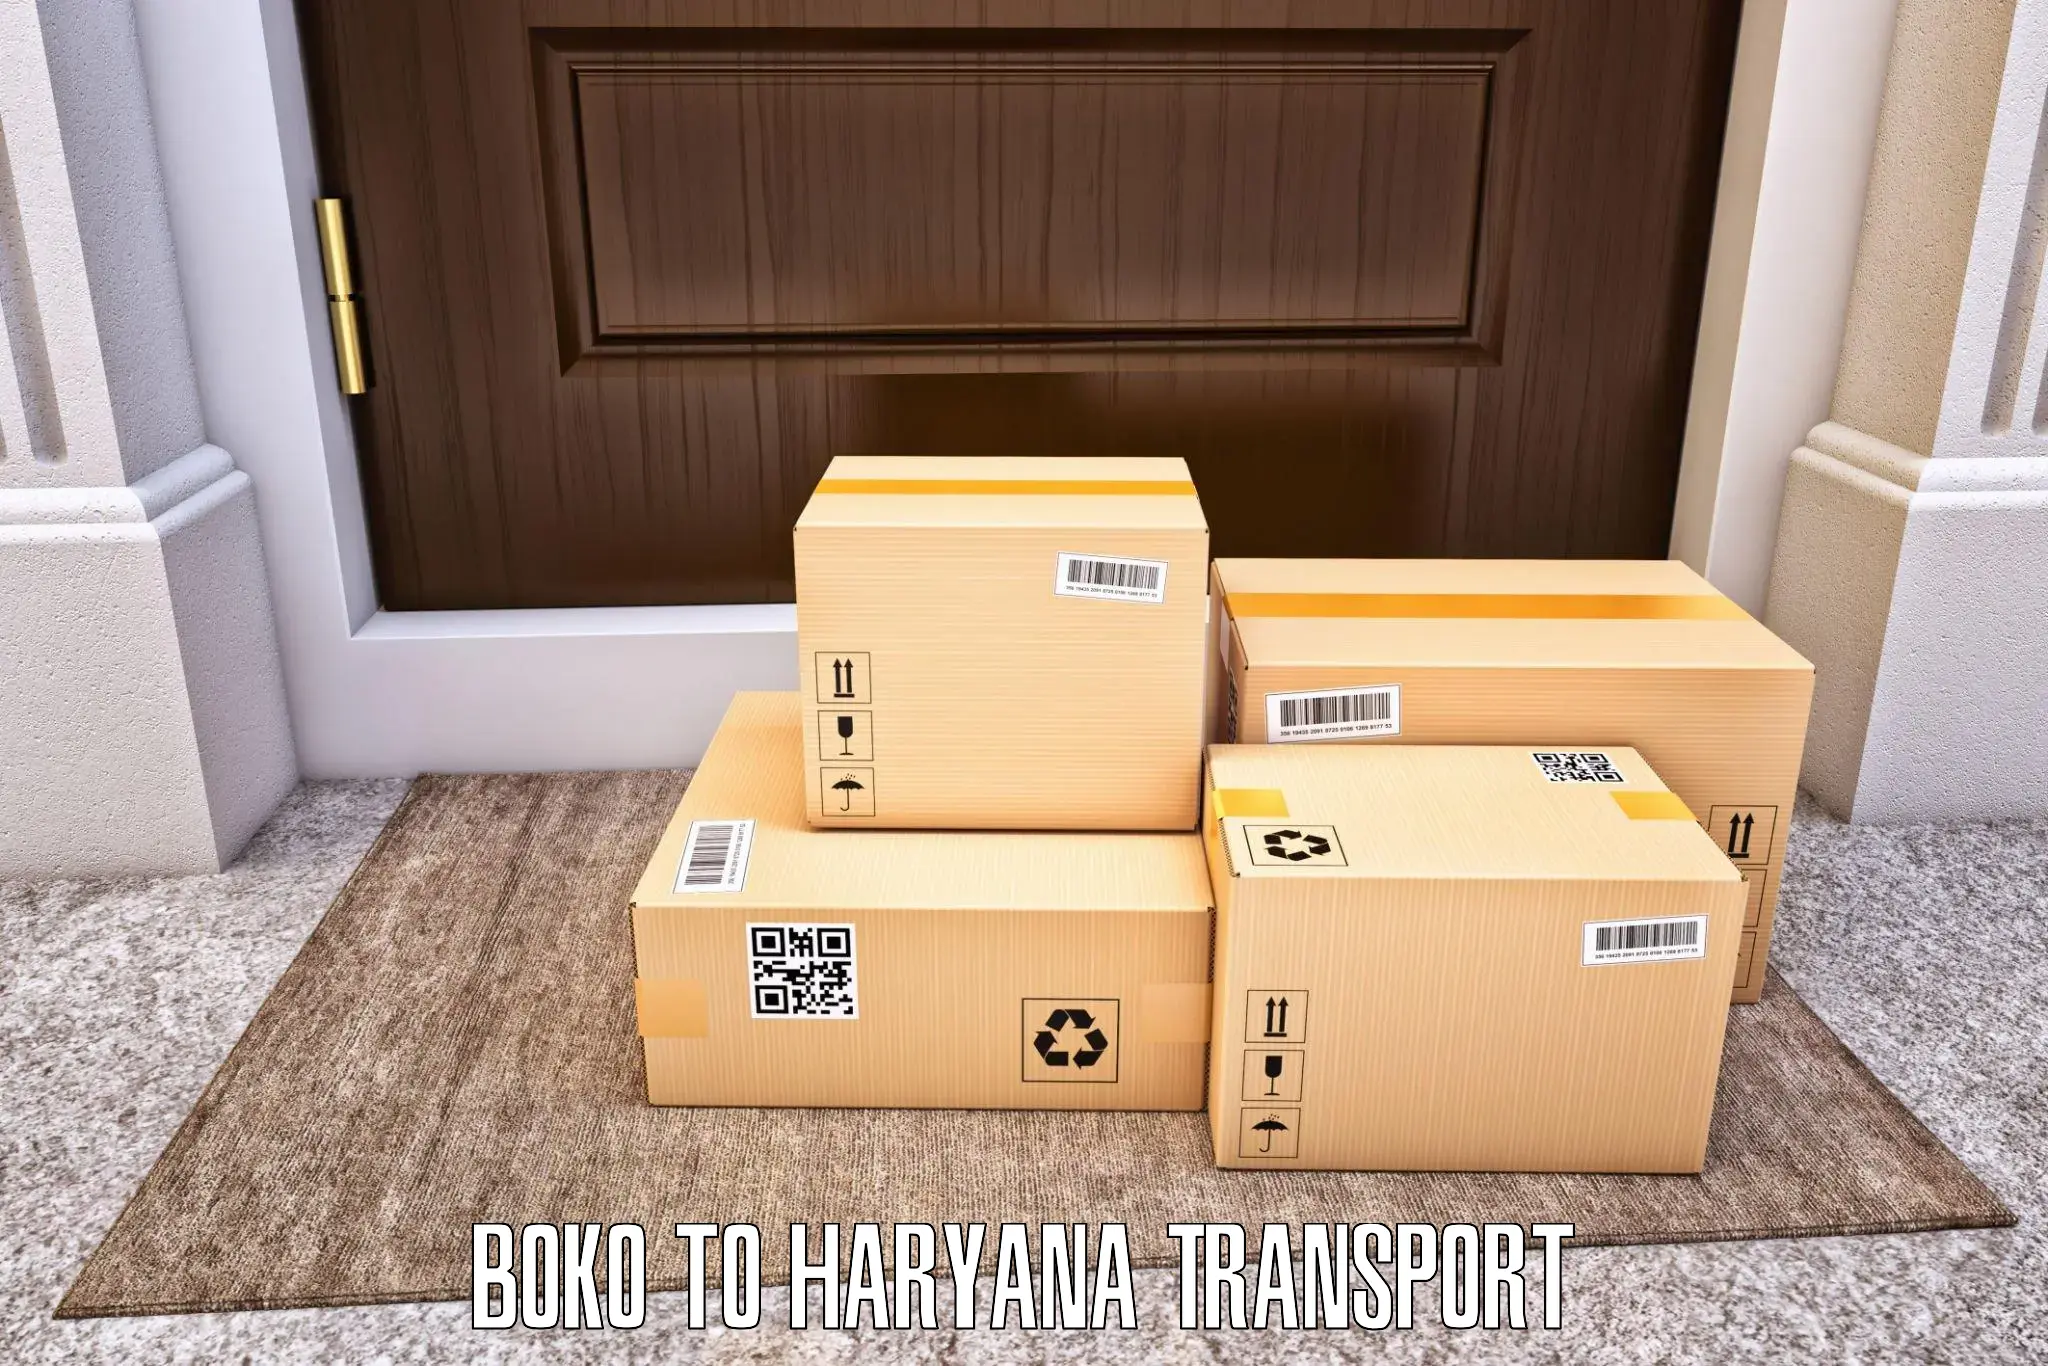 Package delivery services Boko to NCR Haryana